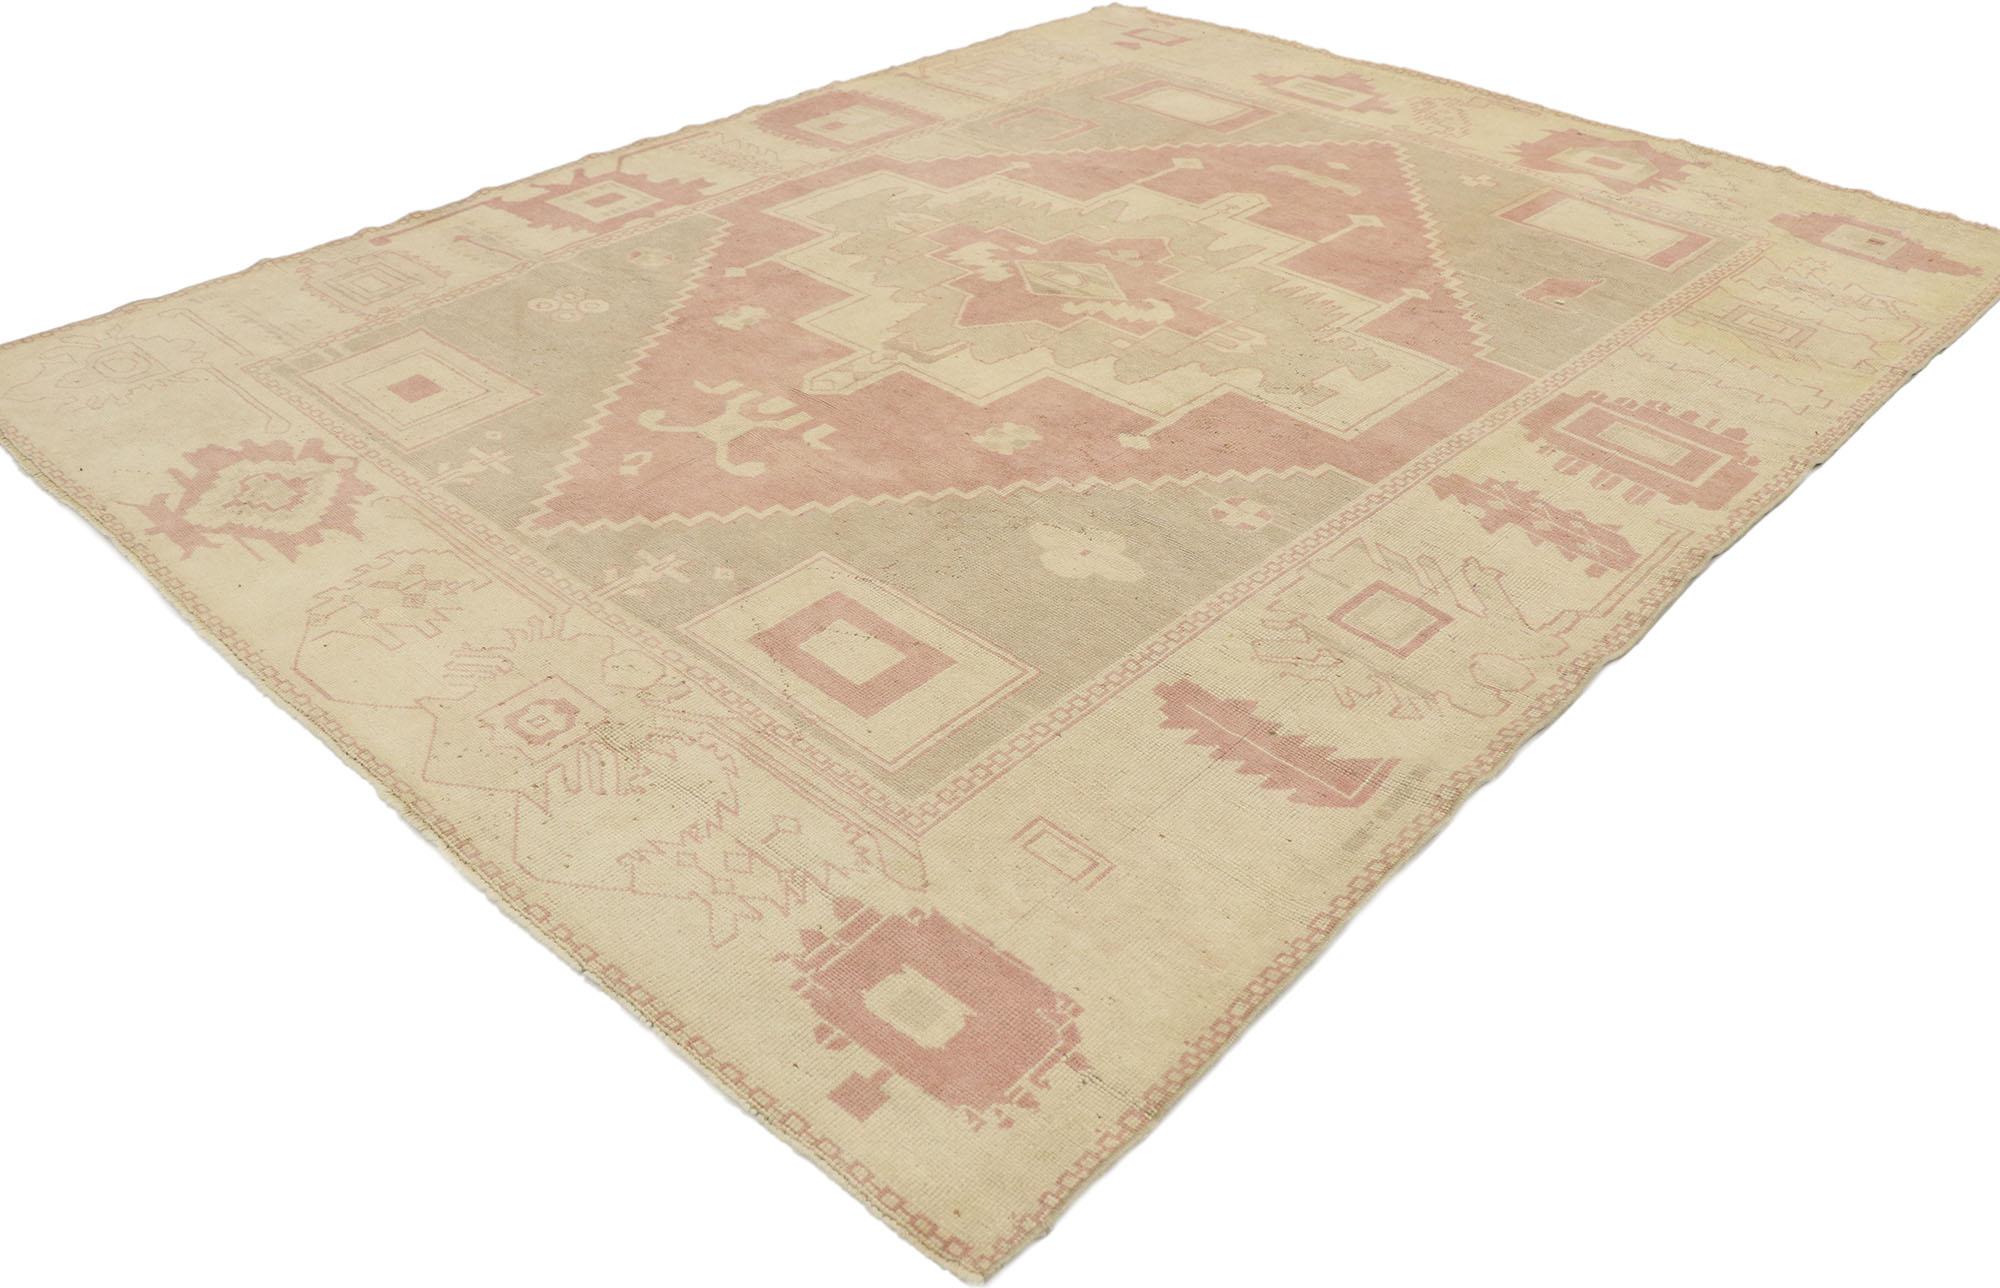 53229 vintage Turkish Oushak rug with French boho chic Transitional style. Emanating timeless elegance and grace, this hand knotted wool vintage Turkish Oushak rug would ground nearly any space with its calm sophistication. The abrashed lozenge